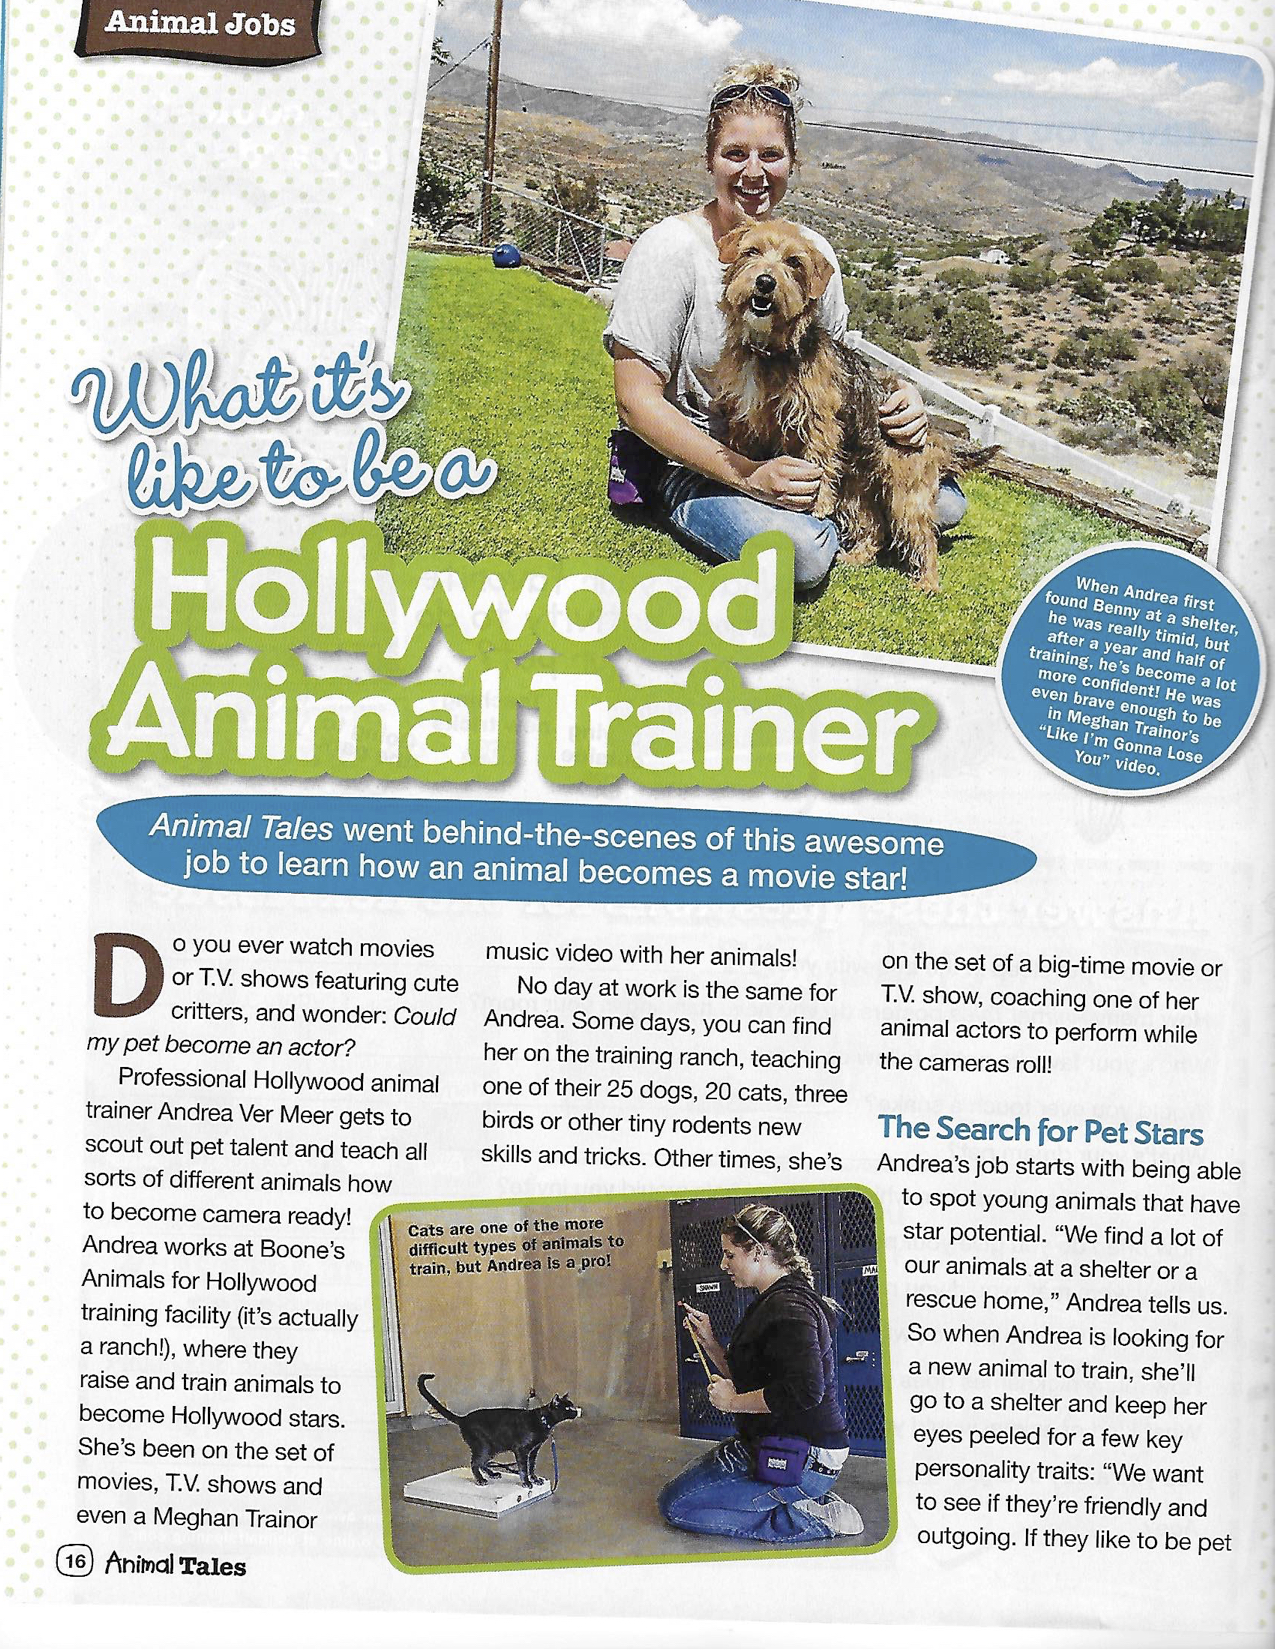 What It's Like to be a Hollywood Animal Trainer